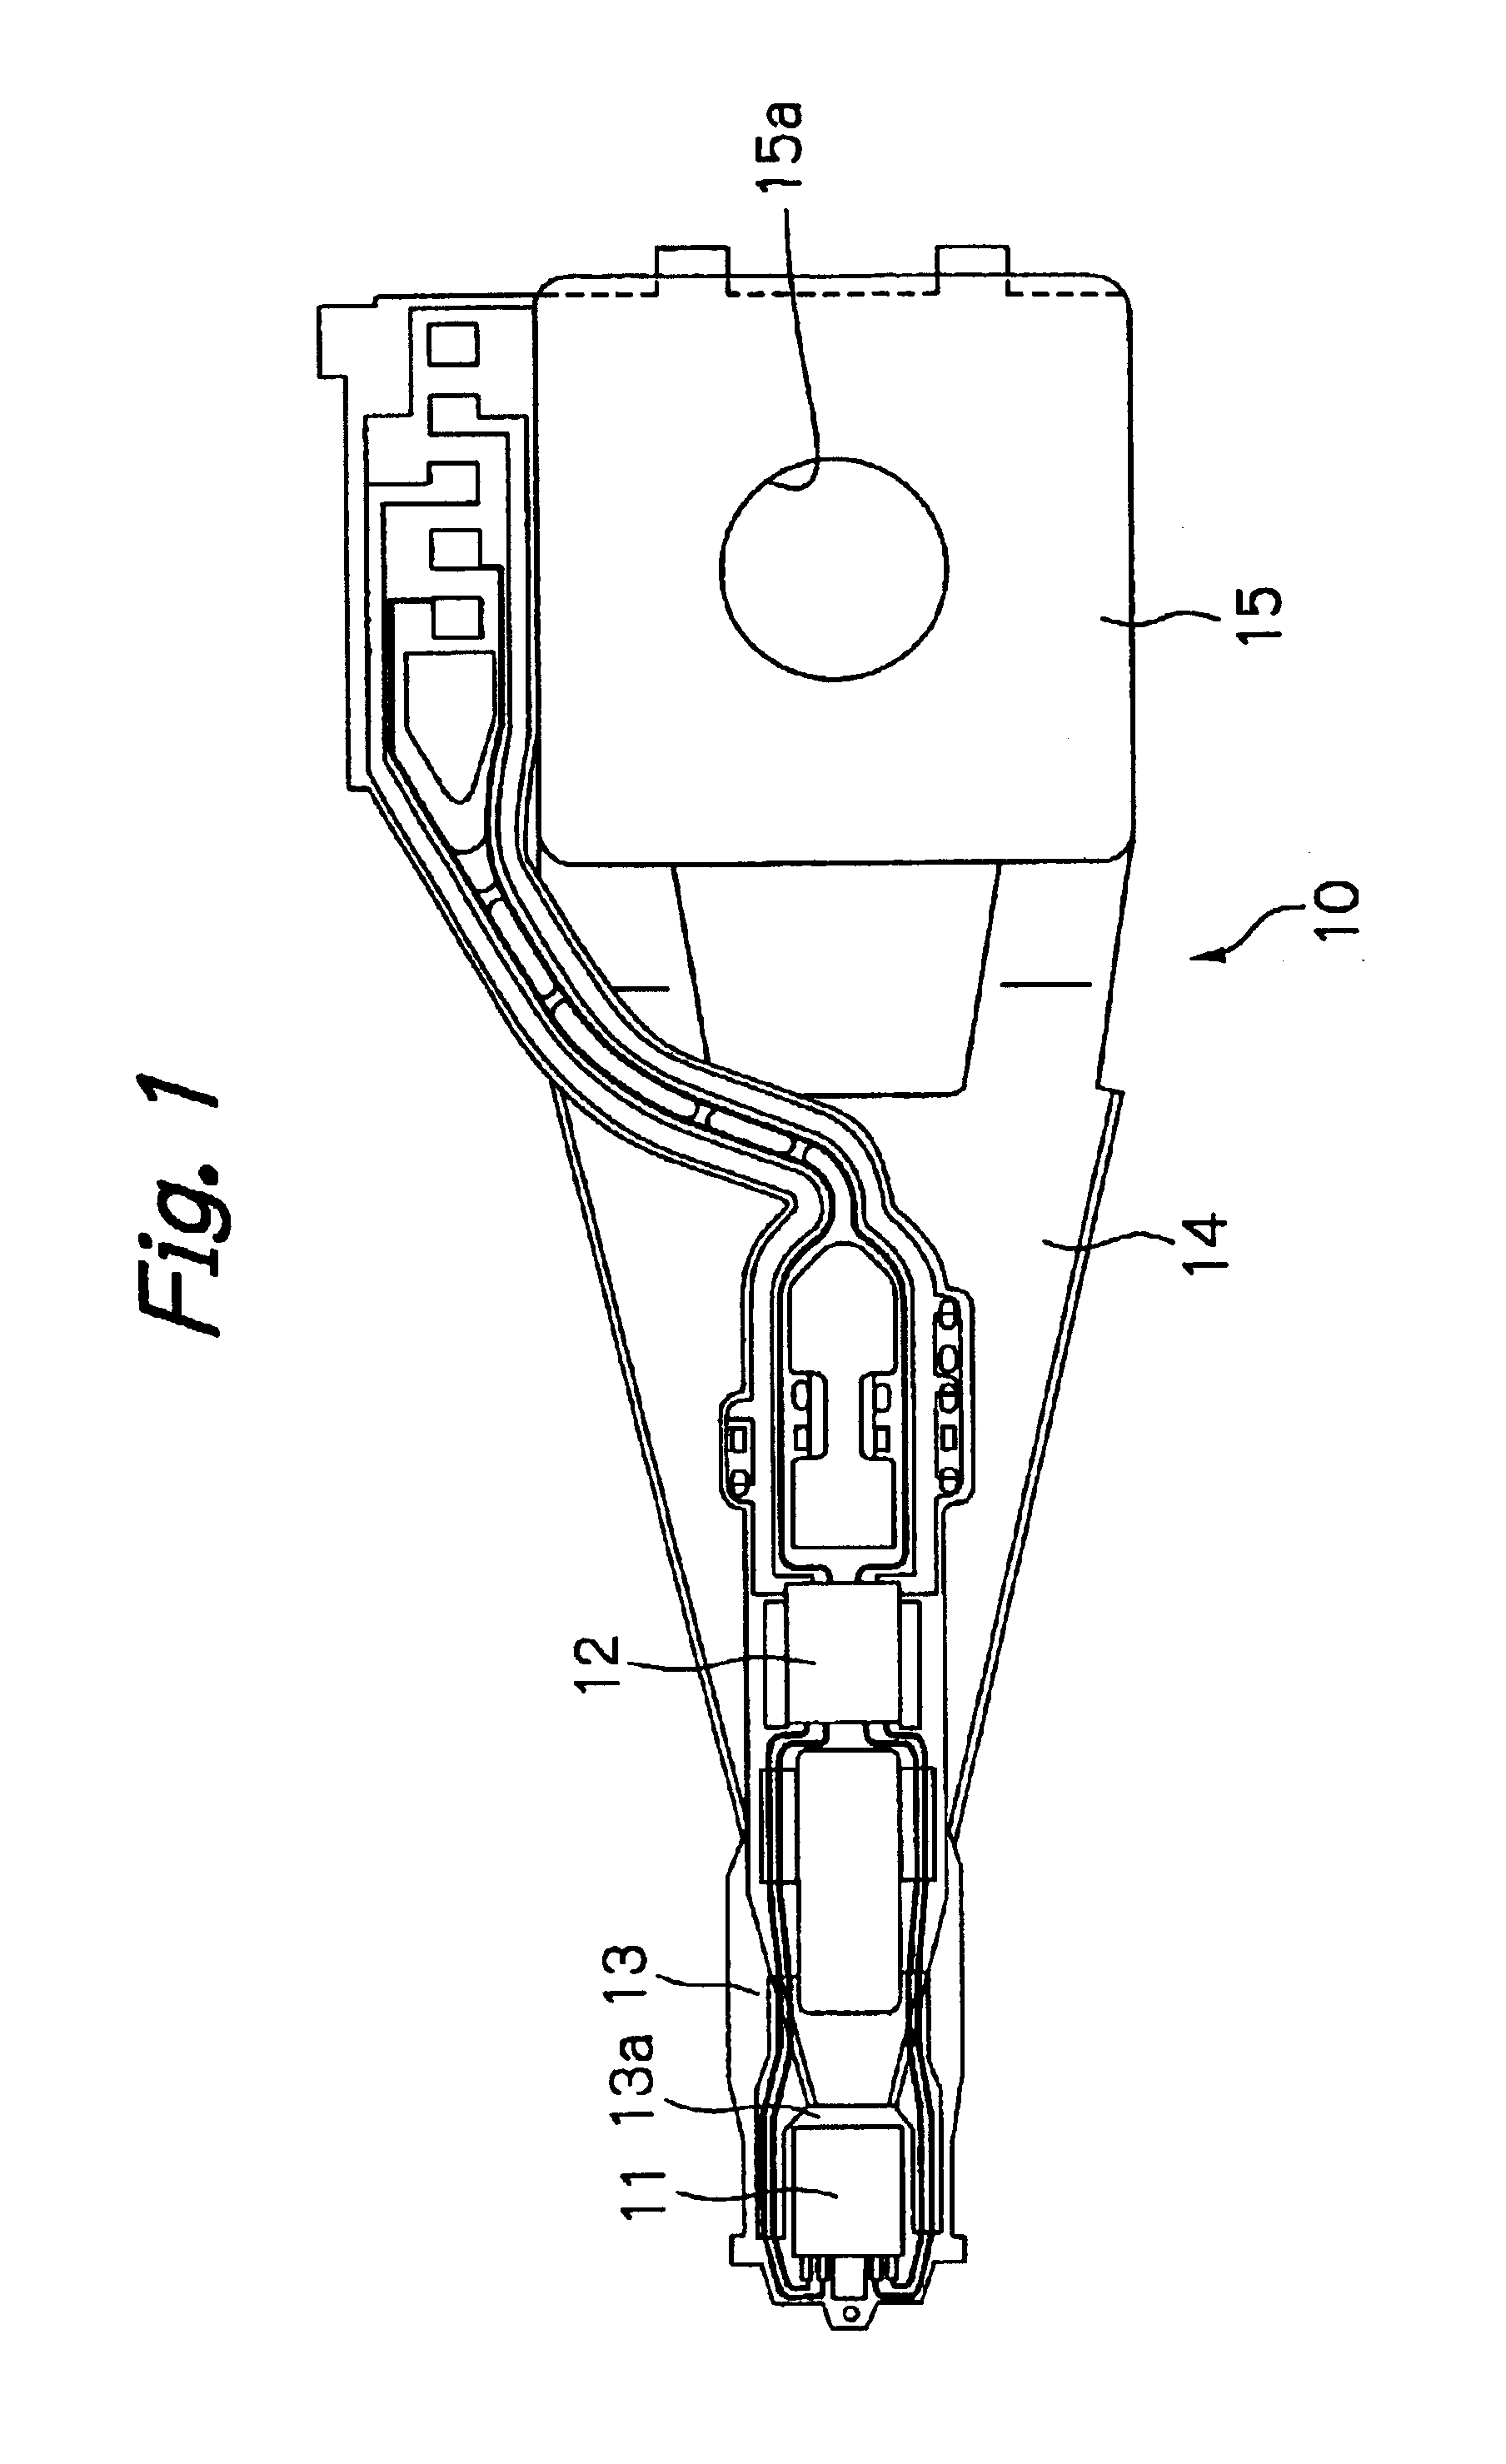 Lead conductor member for thin-film magnetic head and head gimbal assembly, using temporarily connected test connection pads